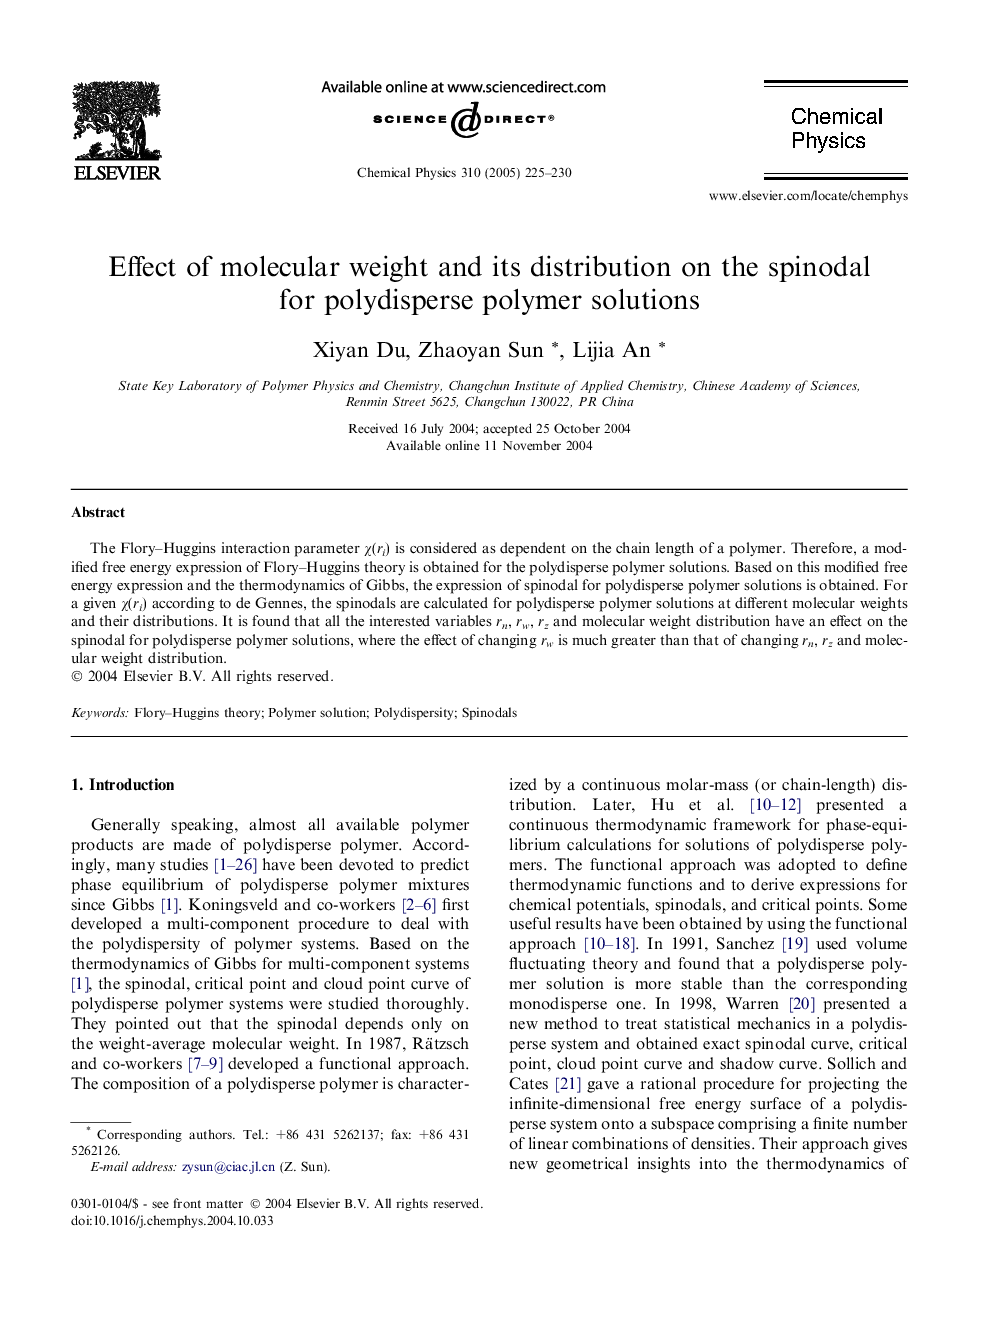 Effect of molecular weight and its distribution on the spinodal for polydisperse polymer solutions